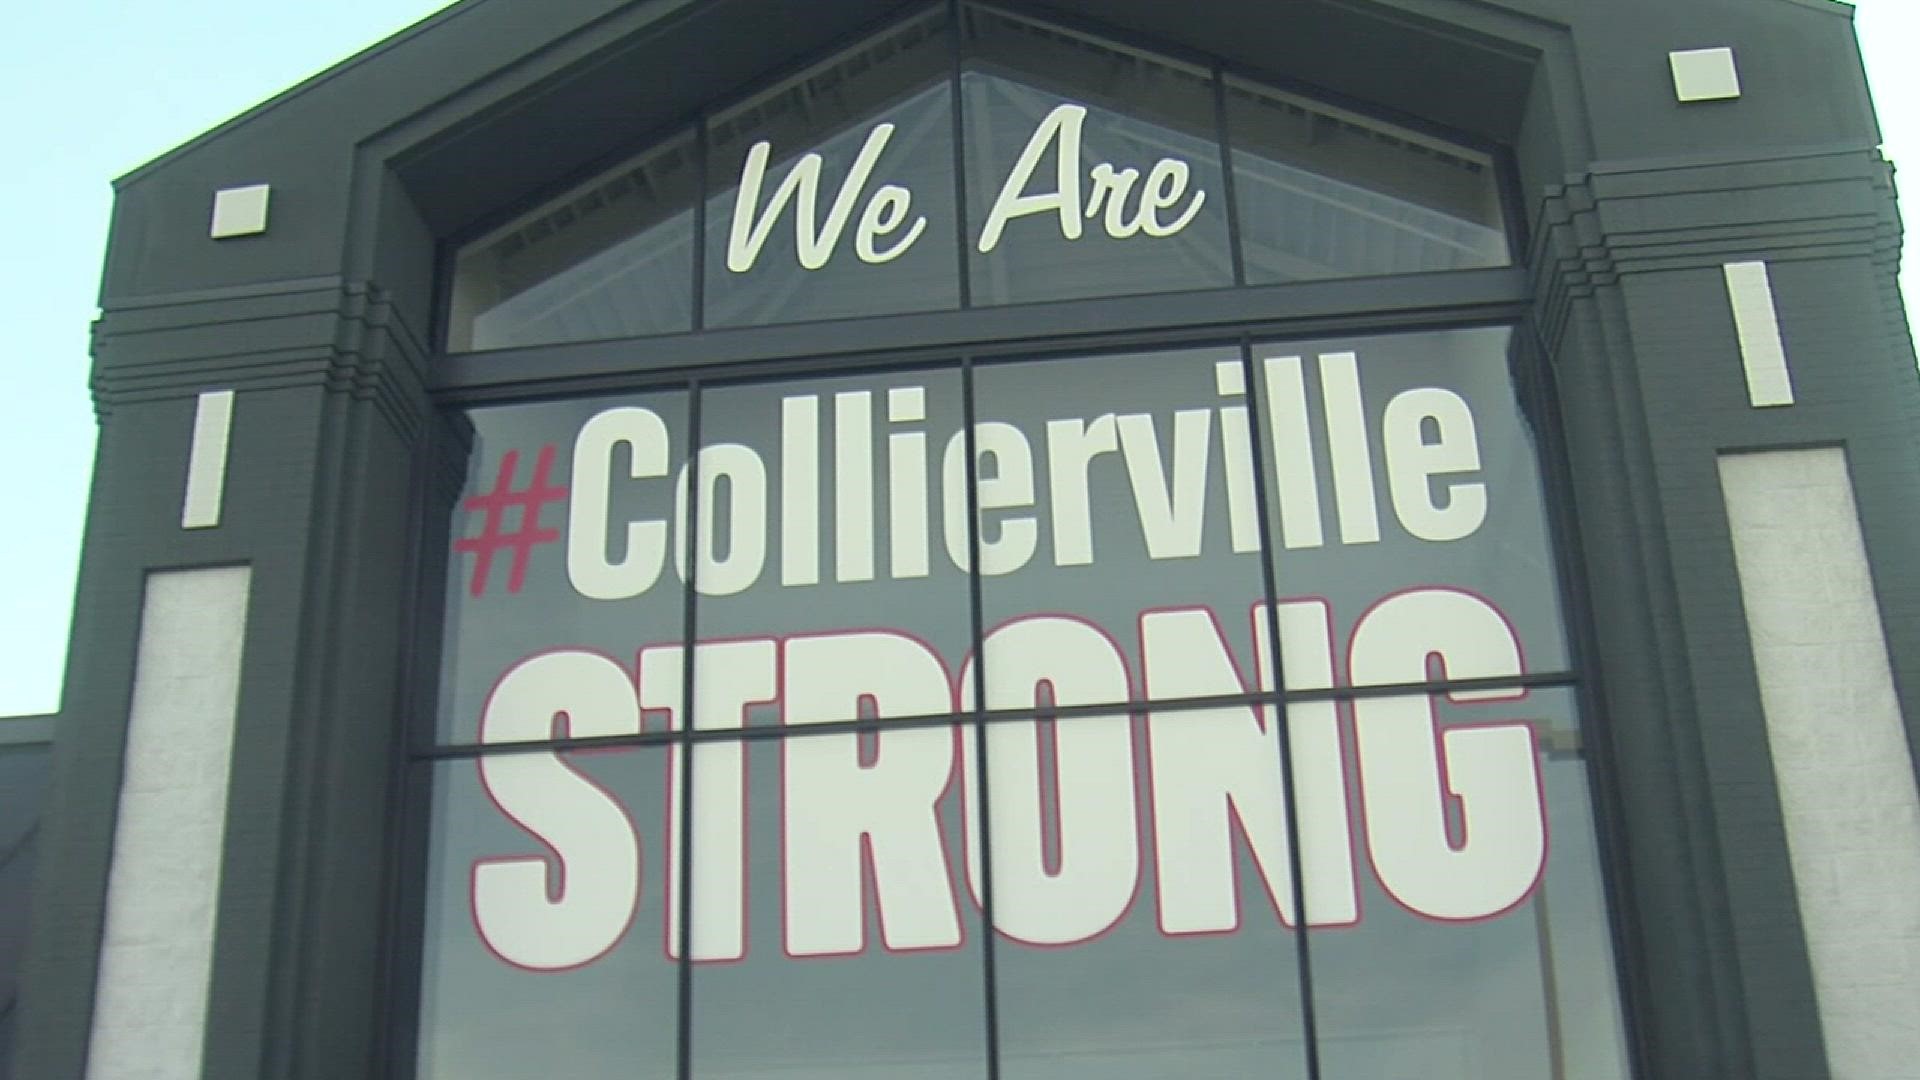 We went around the Collierville community asking what #ColliervilleStrong means to them, one year after a mass shooting killed one and injured 14 others.